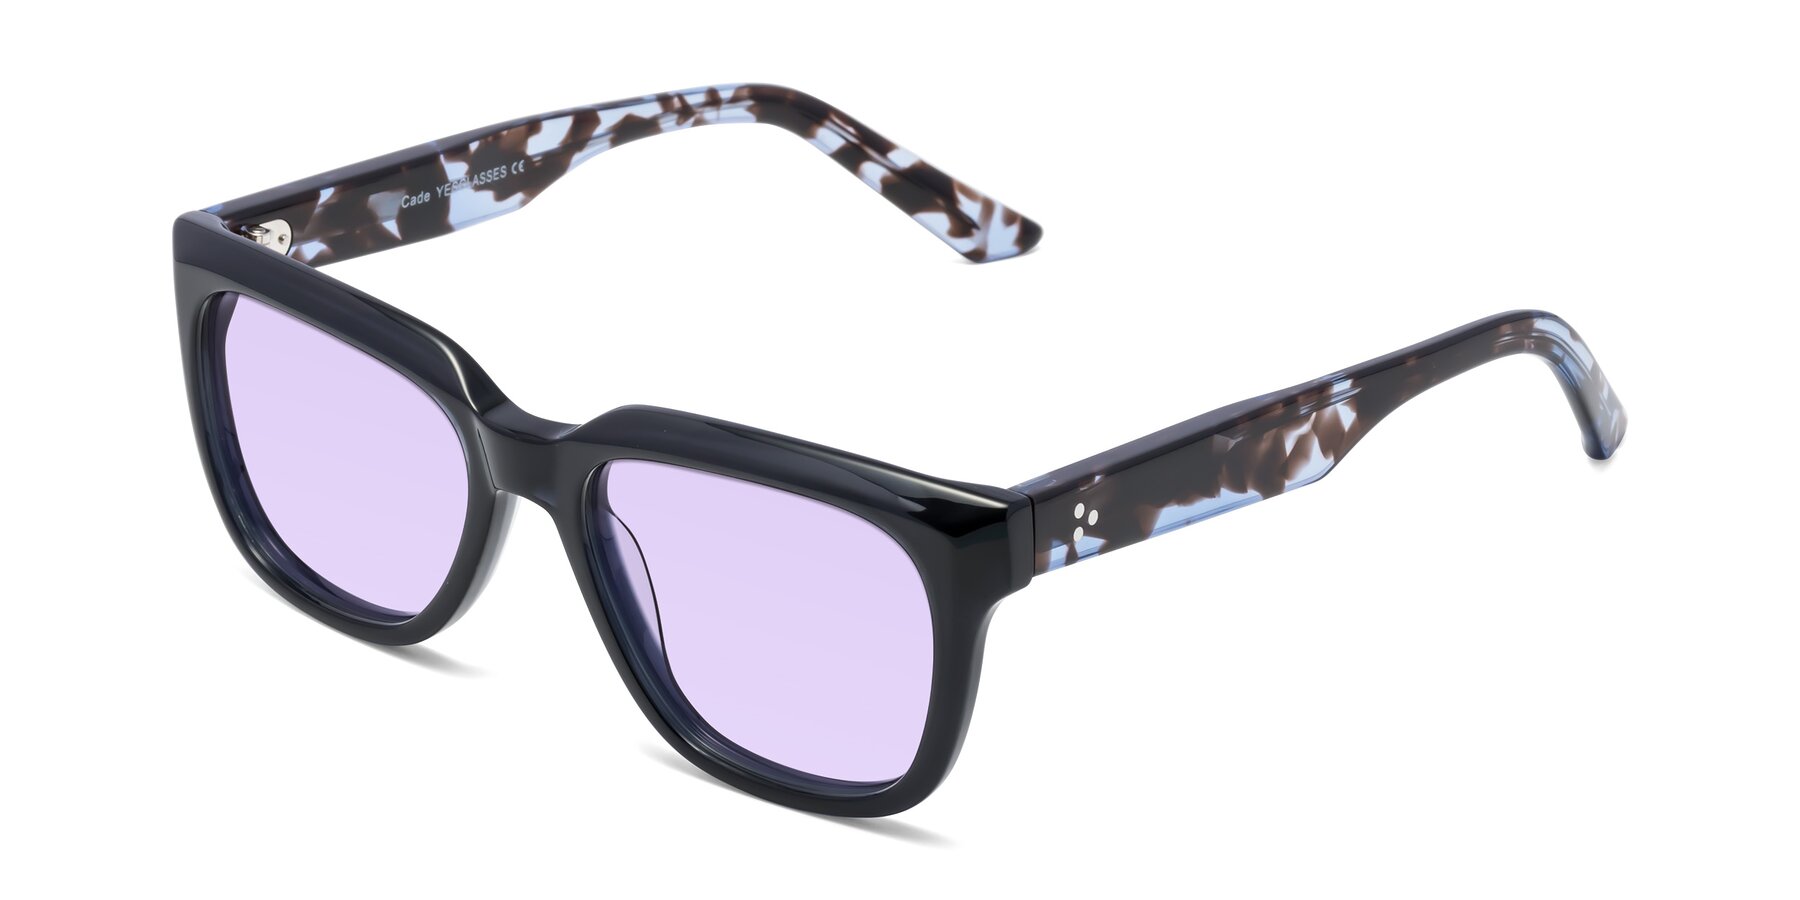 Angle of Cade in Dark Blue-Tortoise with Light Purple Tinted Lenses